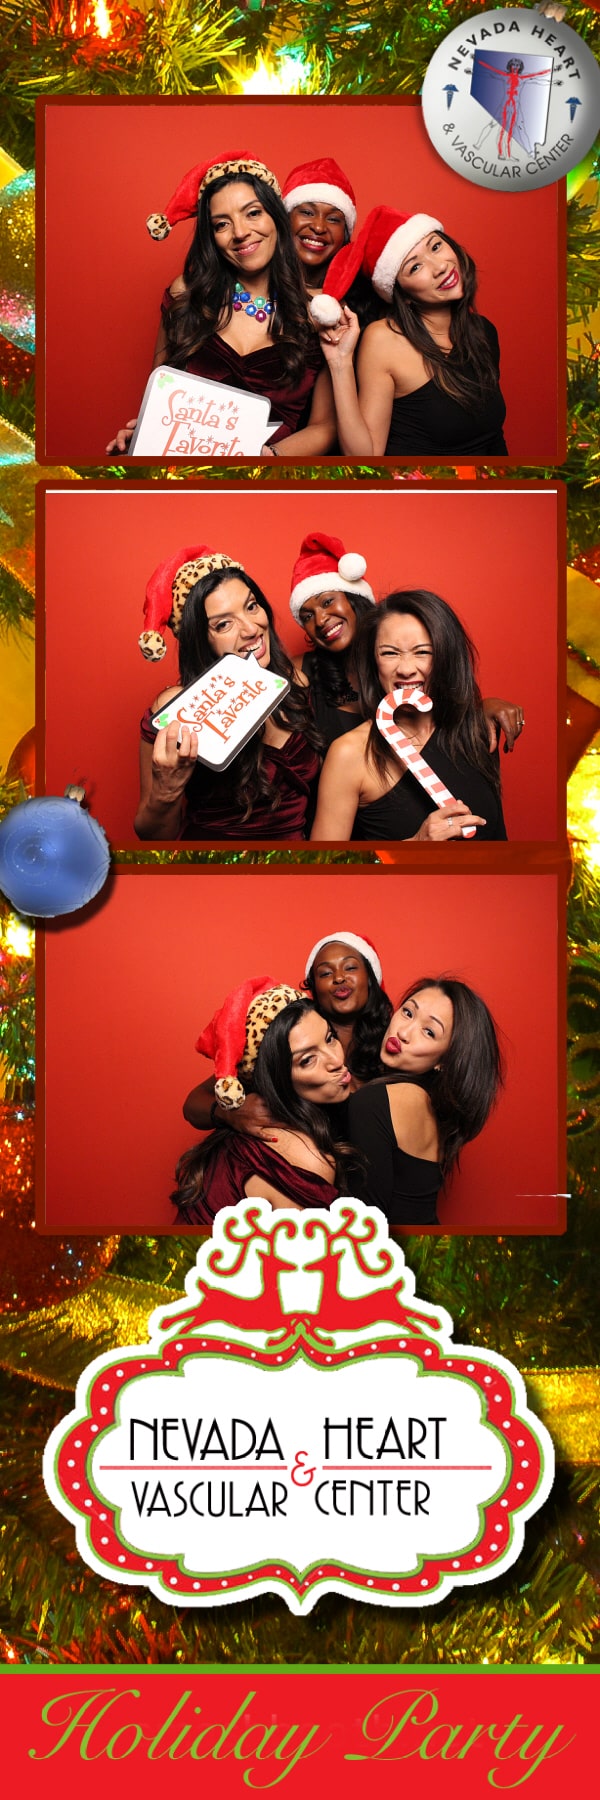 2x6 photo strip of three women with Christmas props posing with red backdrop